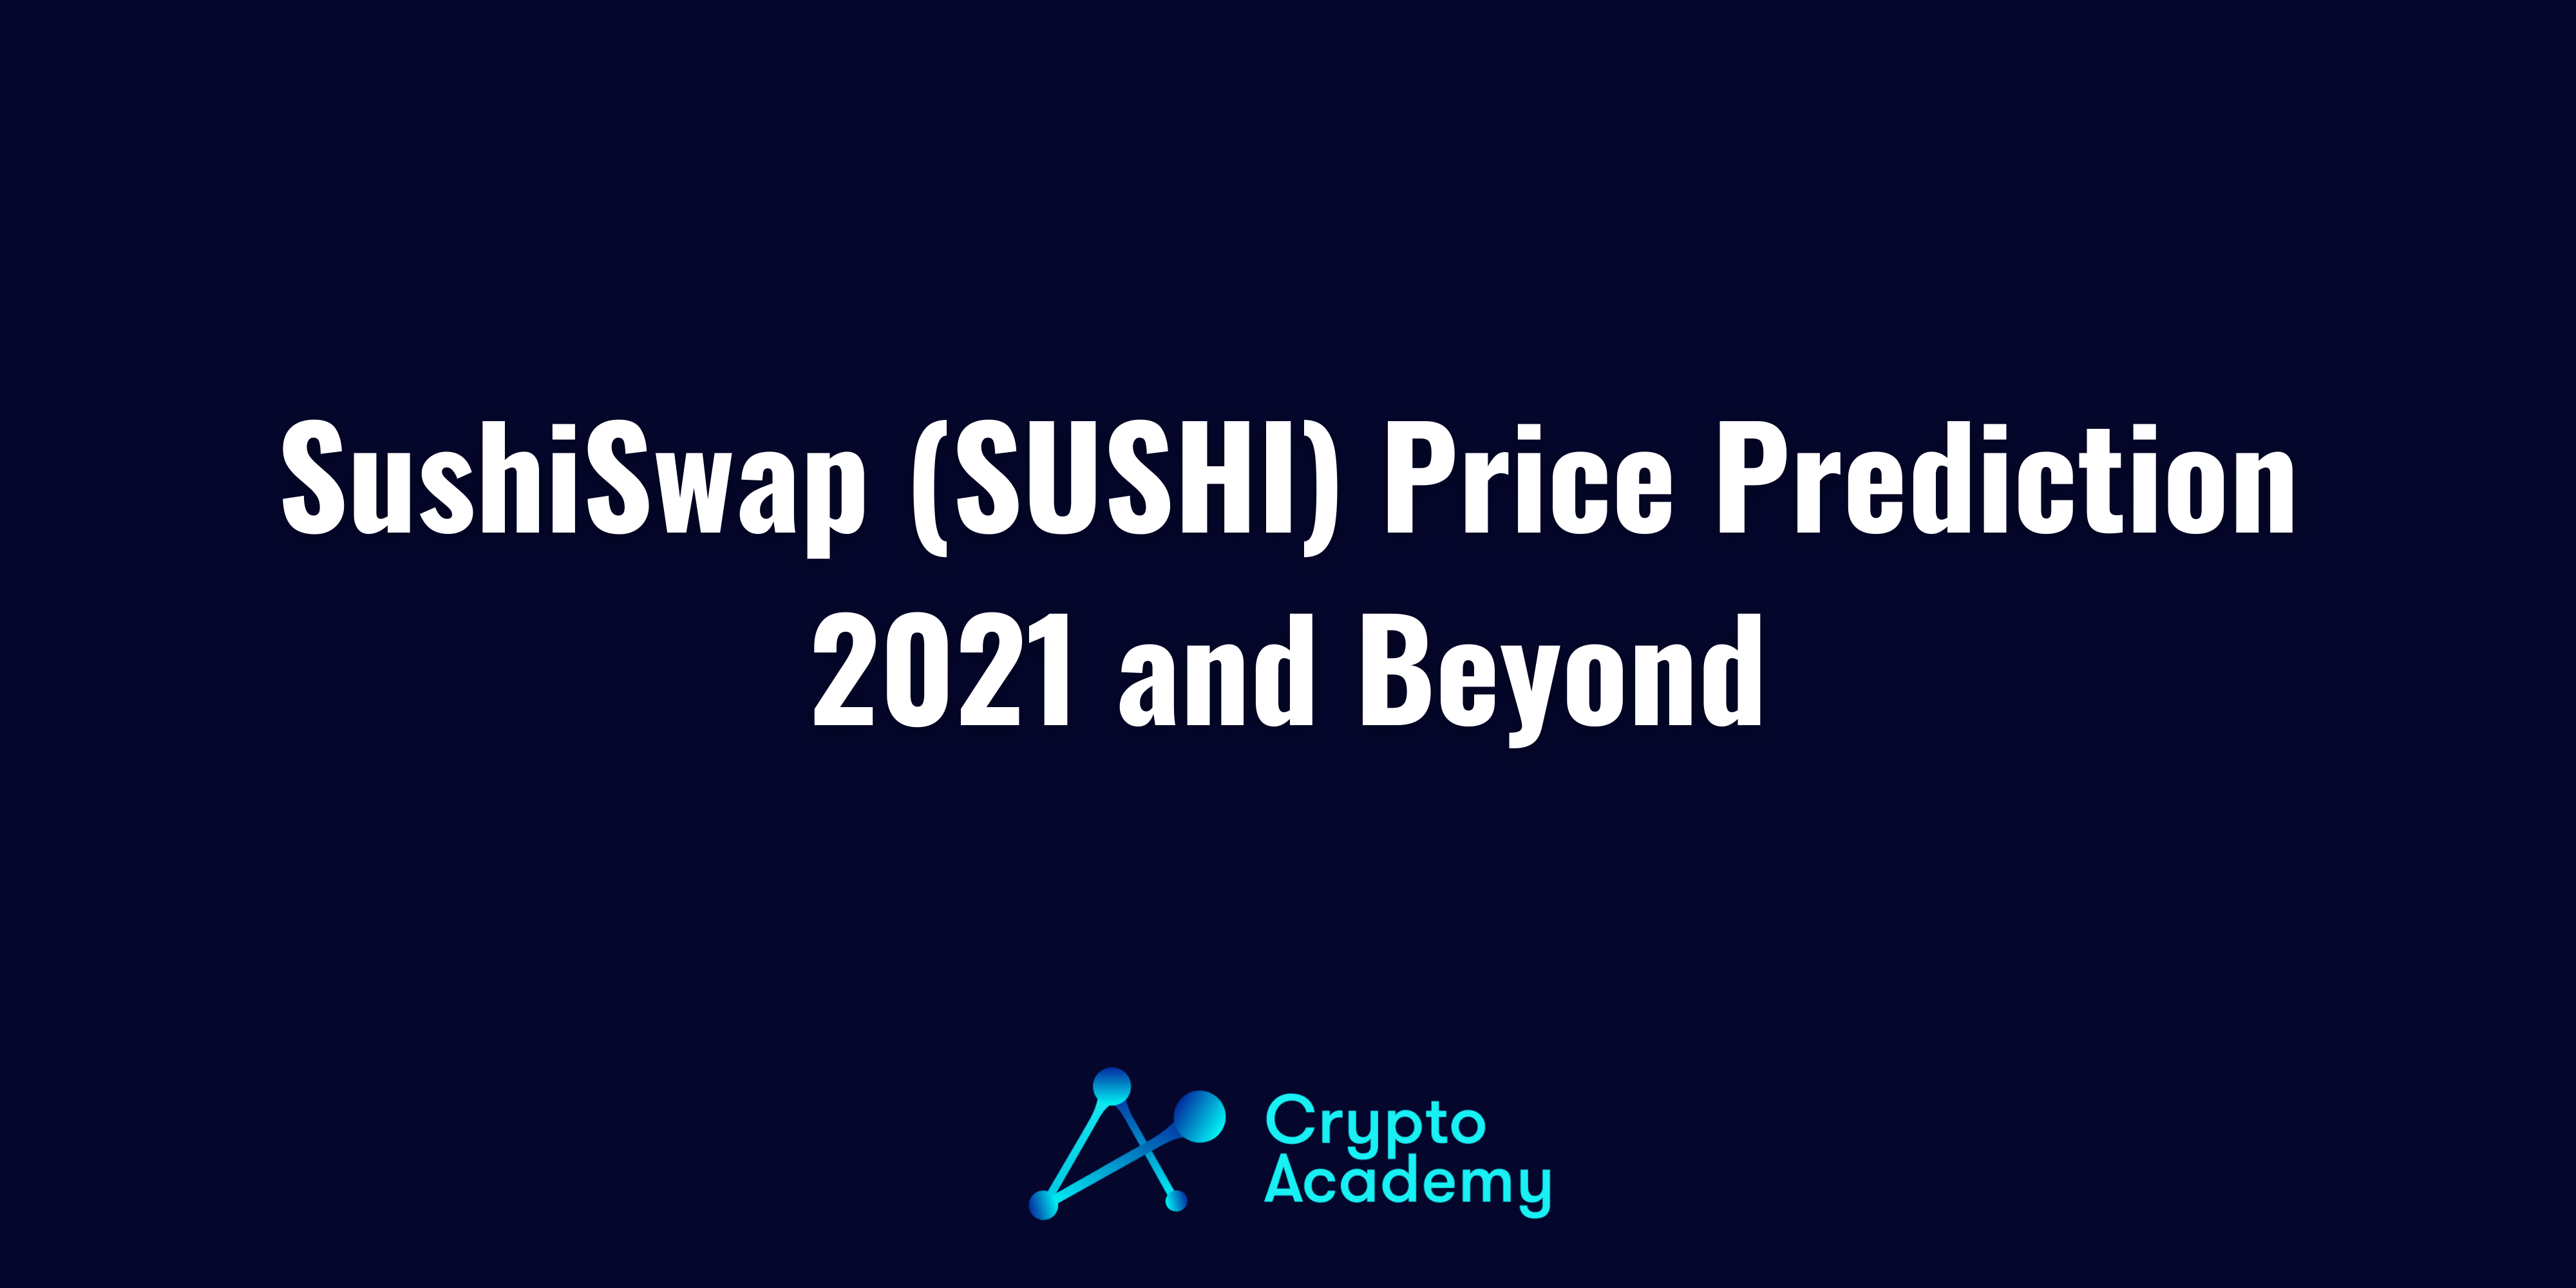 SushiSwap (SUSHI) Price Prediction 2021 and Beyond – Is SUSHI a Good Investment?